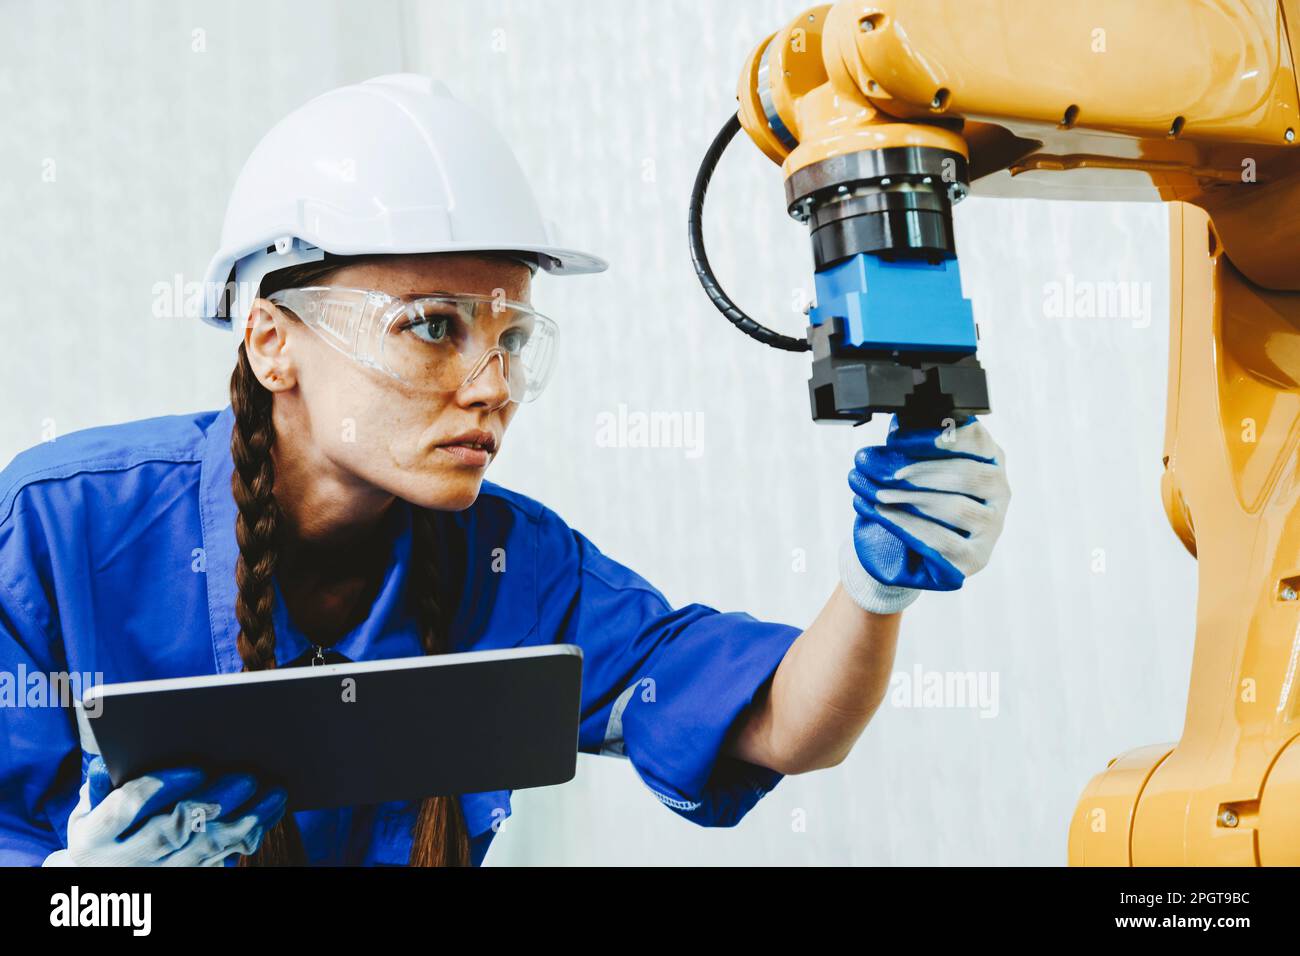 female automation machine engineer student study and inspection control robot arm machine in university or factory workshop. AI robot technology new i Stock Photo